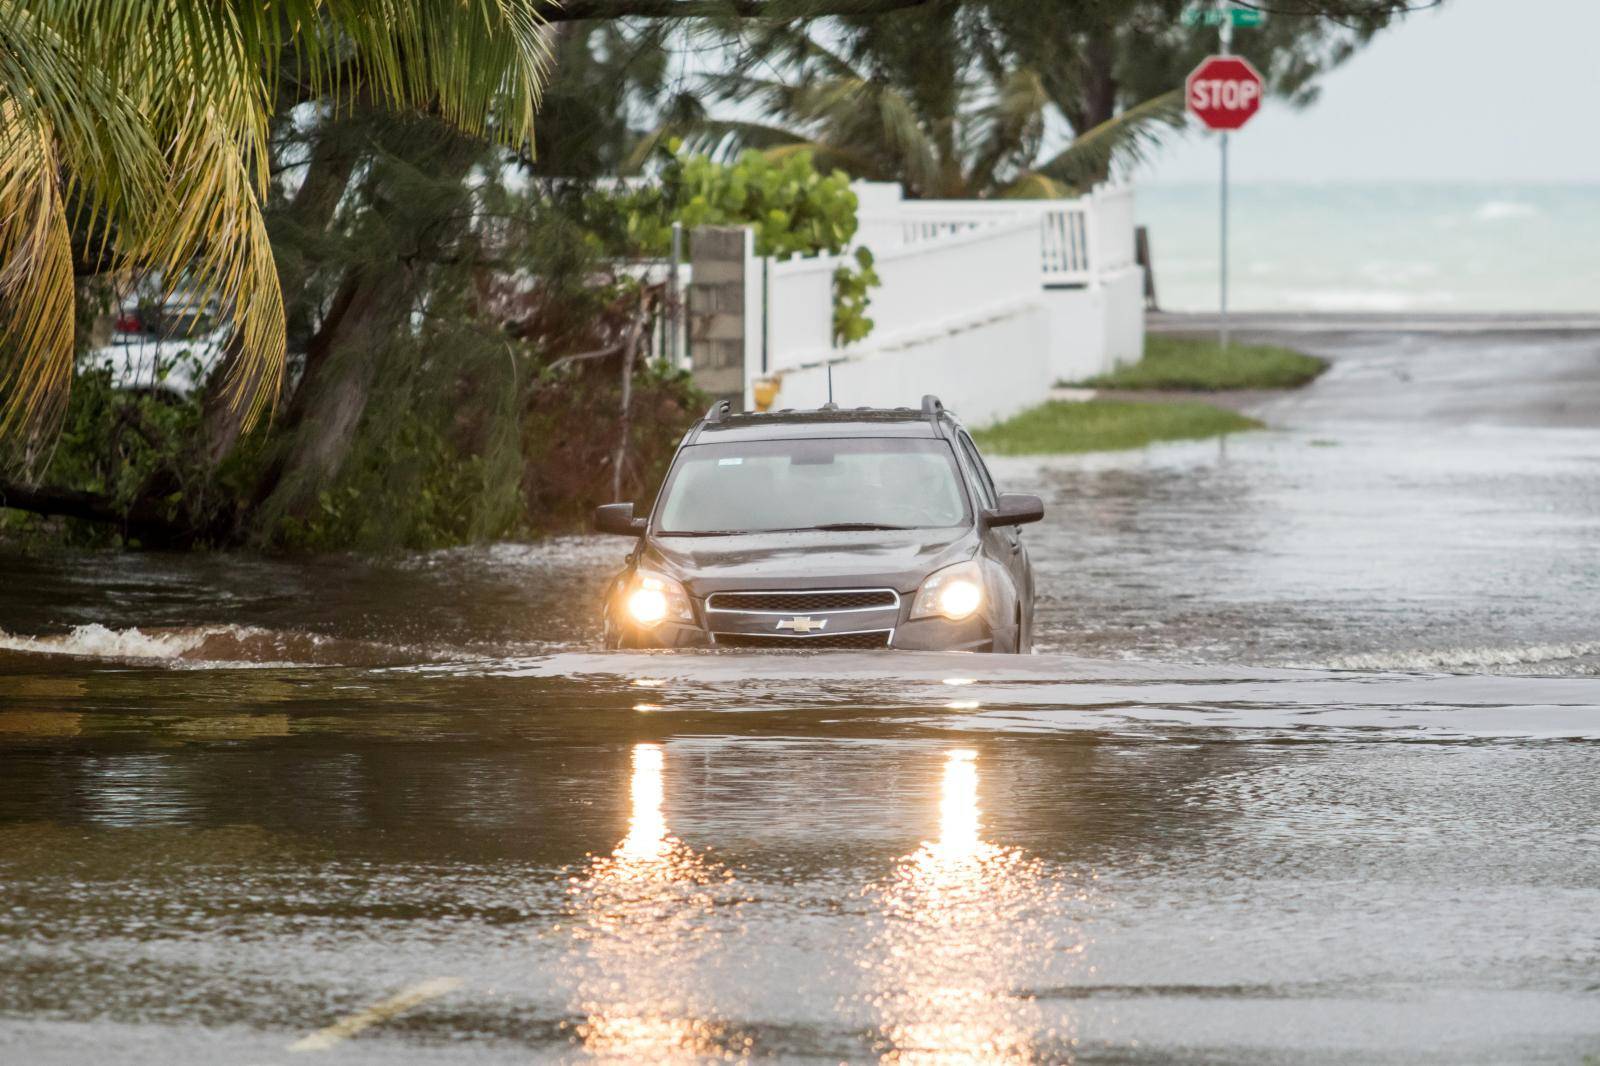 A car drives through a flooded street after the effects of Hurricane Dorian arrived in Nassau